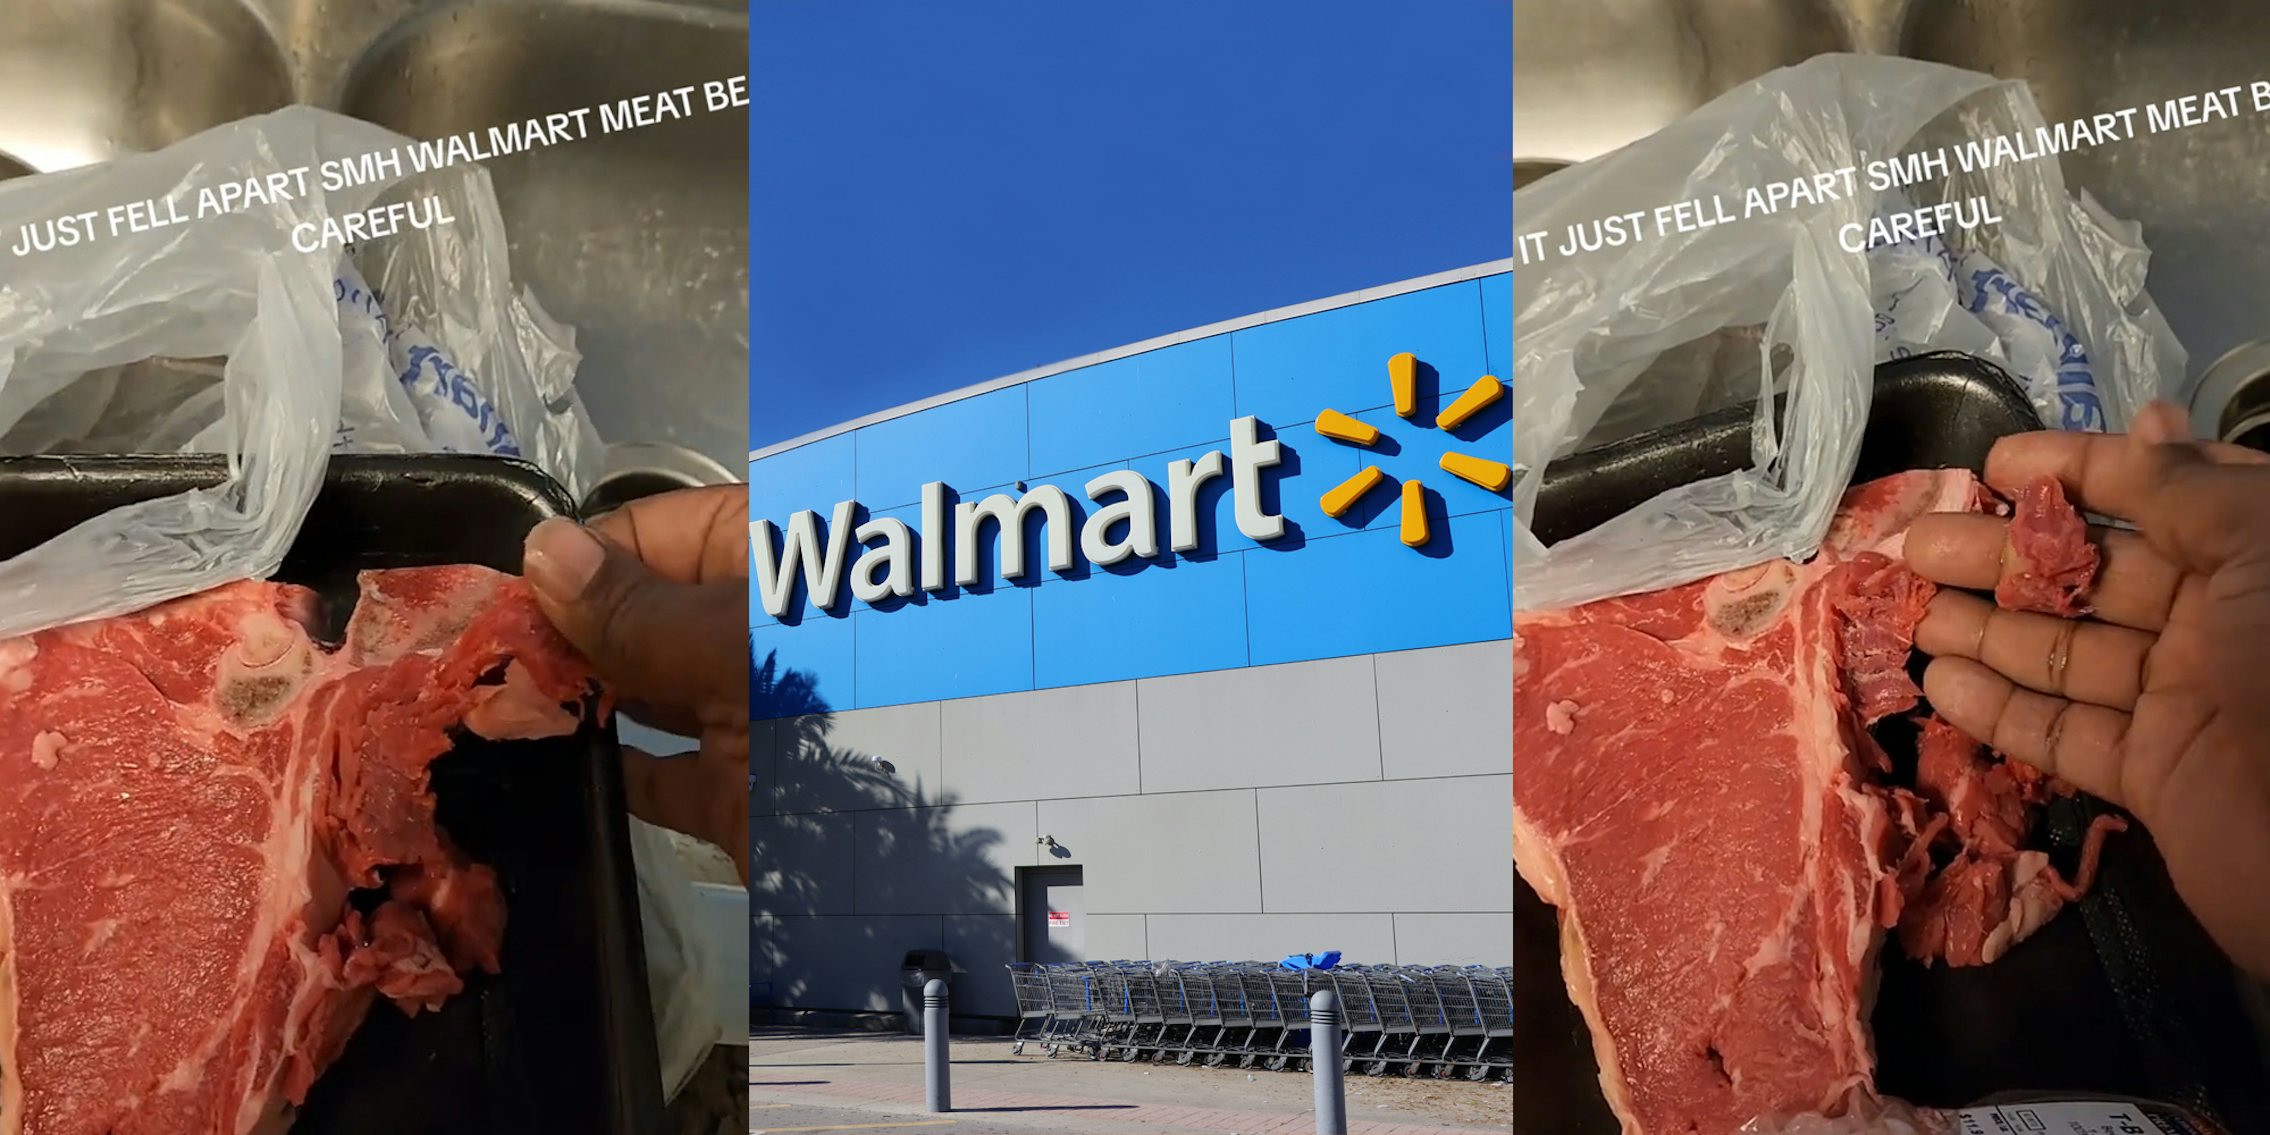 Walmart customer holding meat with caption 'JUST FELL APART SMH WALMART MEAT BE CAREFUL' (l) Walmart building with sign (c) Walmart customer holding meat with caption 'JUST FELL APART SMH WALMART MEAT BE CAREFUL' (r)